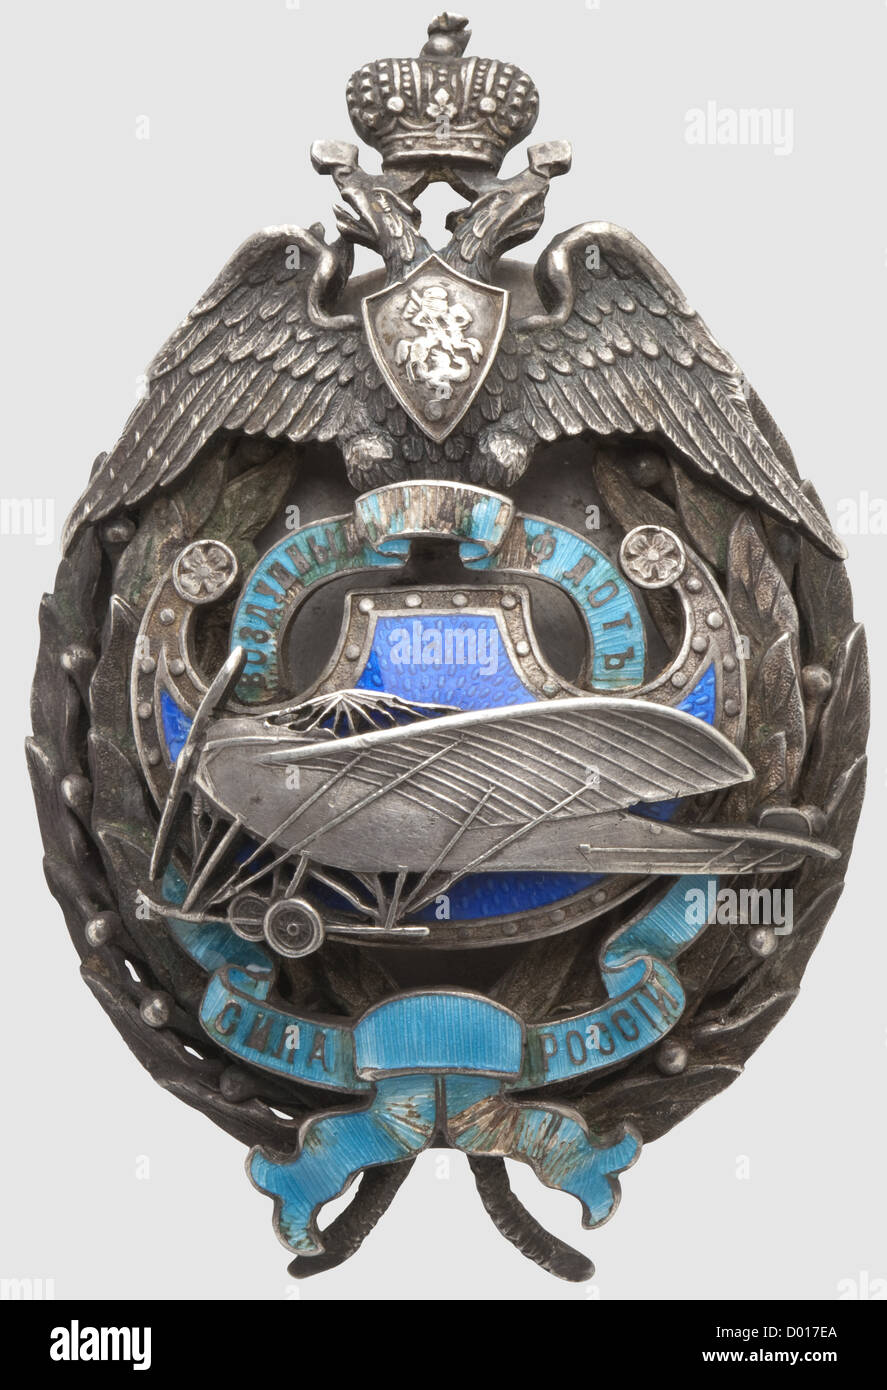 A Standard Flyer's Badge,Russia circa 1914. Silver,fashioned in multiple sections,enamelled areas. Interlaced bandeau(chipped)with Cyrillic inscription(tr)'Russia's Strength - Aviation'. Reverse Cyrillic master's mark 'VA',kokoschnik punch as well as fineness punch for '84' zolotniki. Pressure plate with maker's mark 'Eduard',master's mark 'VA' and kokoschnik head punch. Dimensions 70 x 46 mm,weight 59 g. Fine quality,historic,historical,1910s,20th century,medal,decoration,medals,decorations,badge of honour,badge of honor,badges of honour,,Additional-Rights-Clearences-Not Available Stock Photo